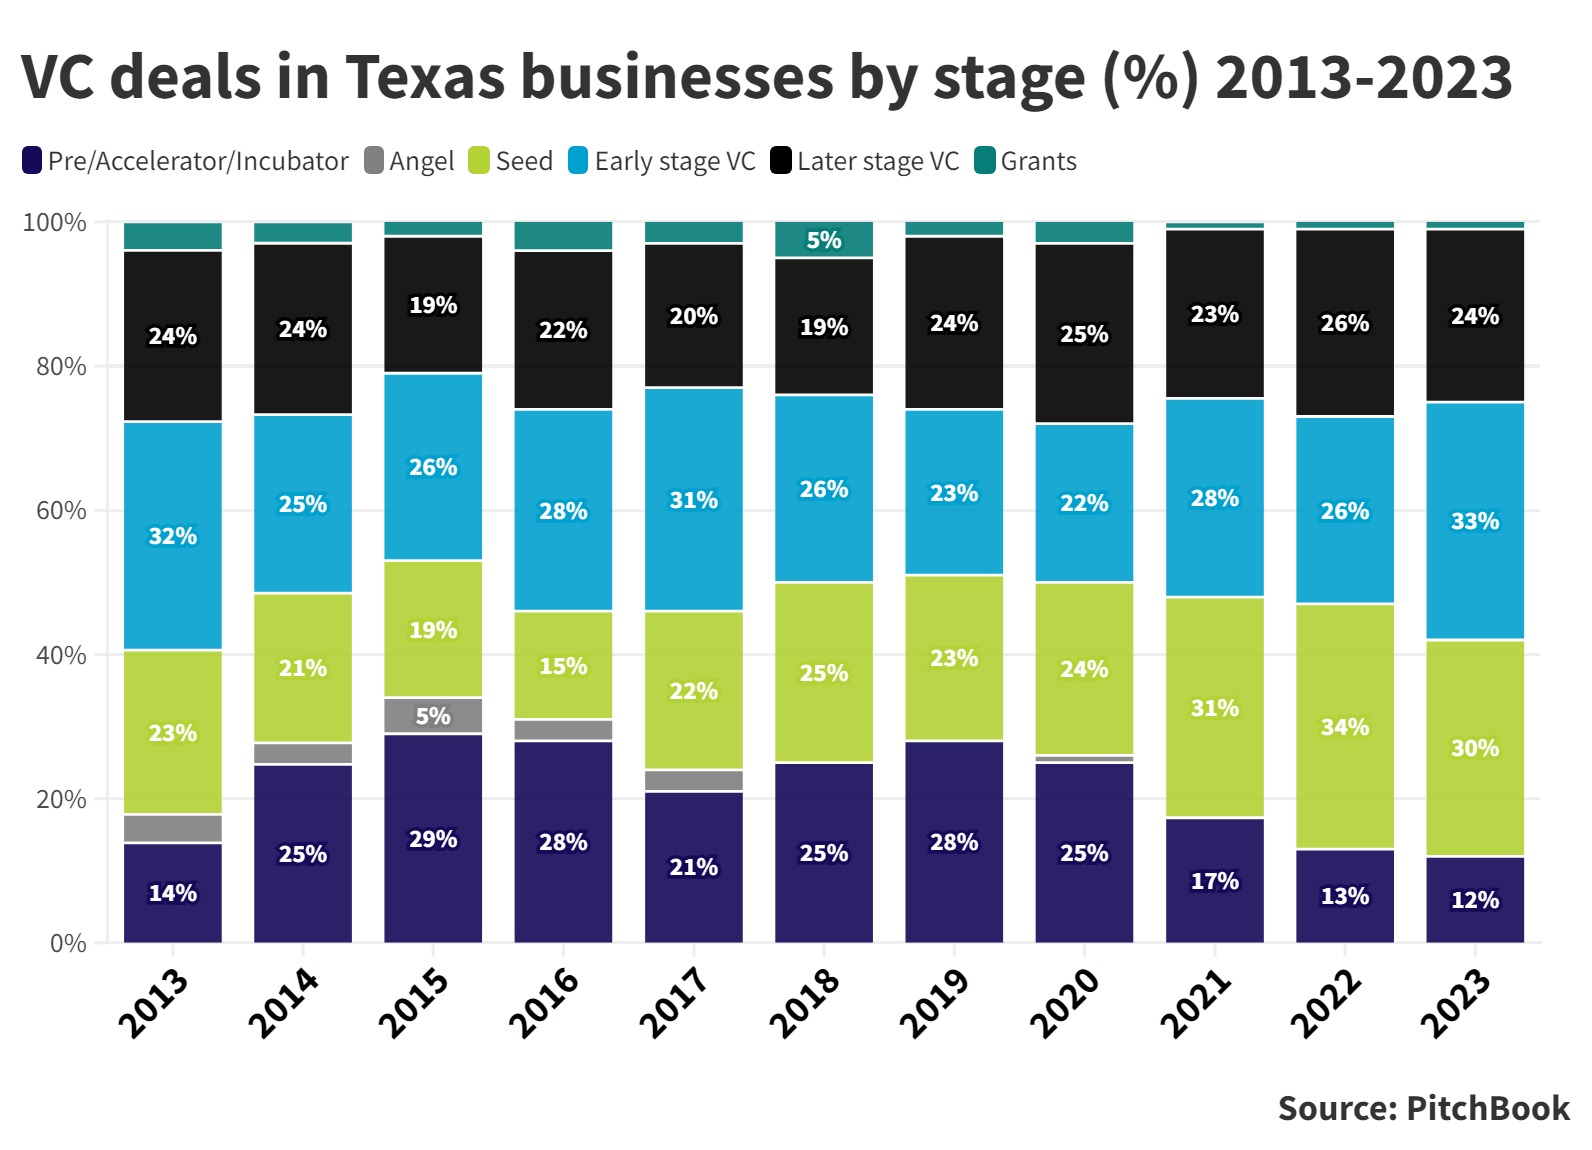 VC-backed deals in Texas by deal stage (%) 2013-23. Source: PitchBook 